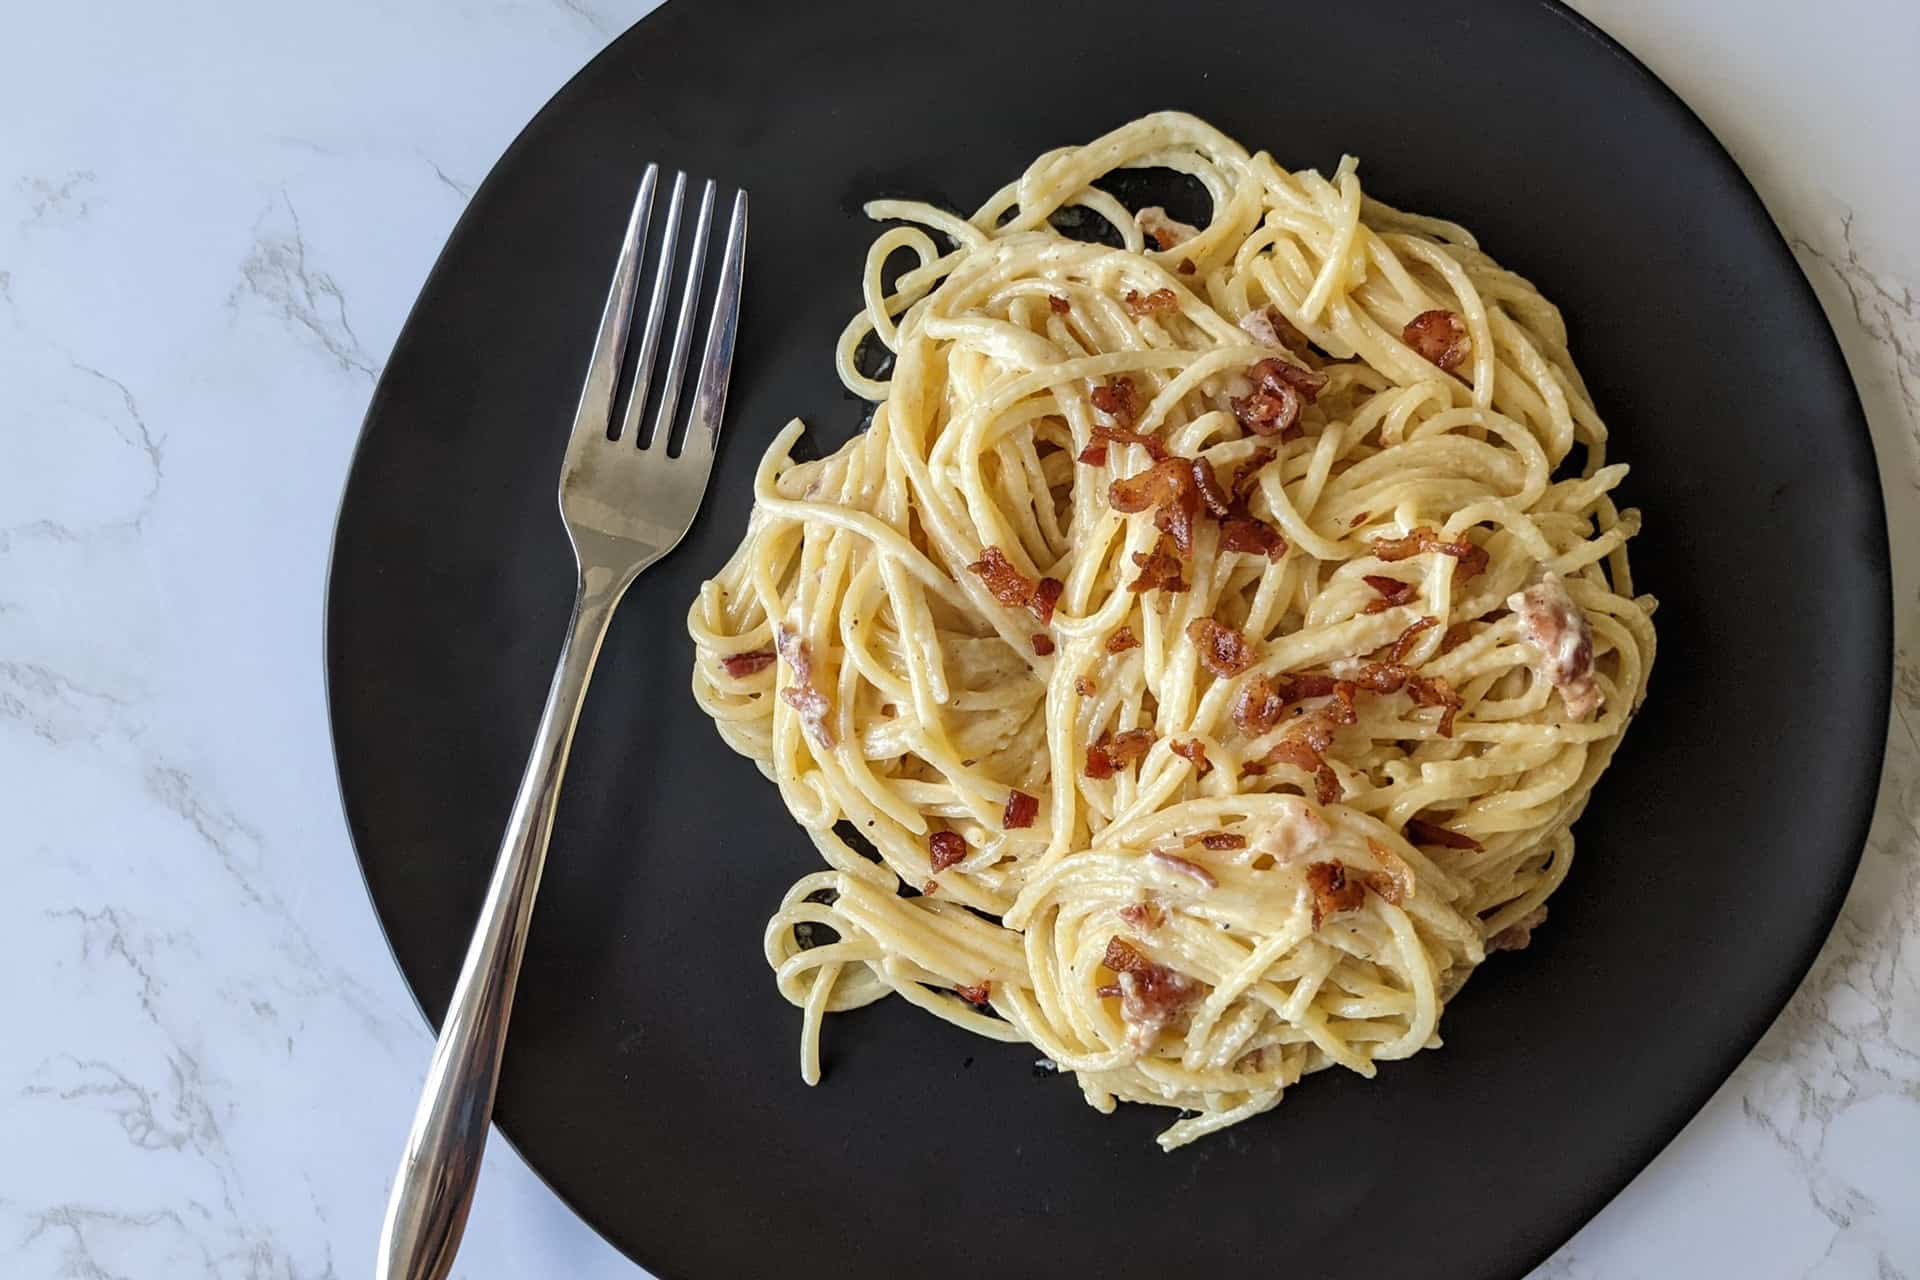 A plate of spaghetti carbonara made with crumbled bacon